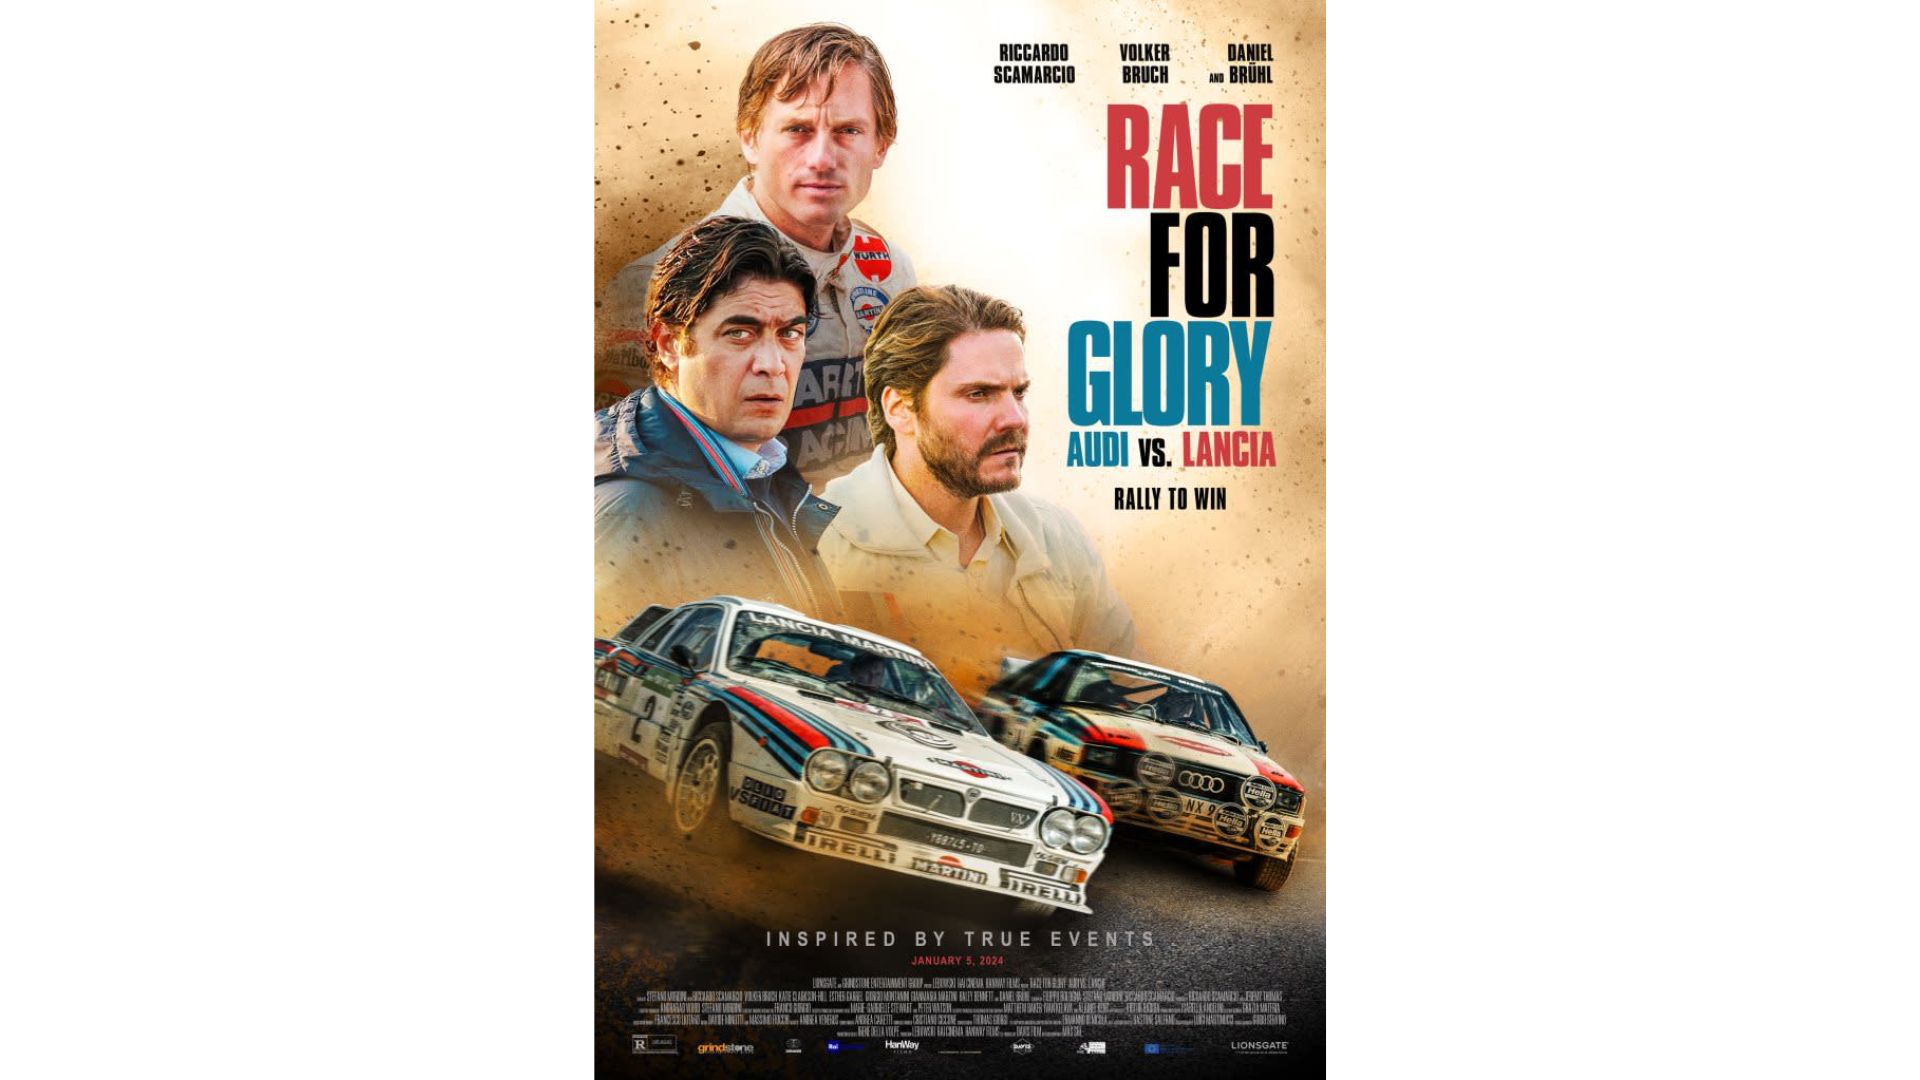 The Audi vs. Lancia WRC rivalry is coming to theaters soon